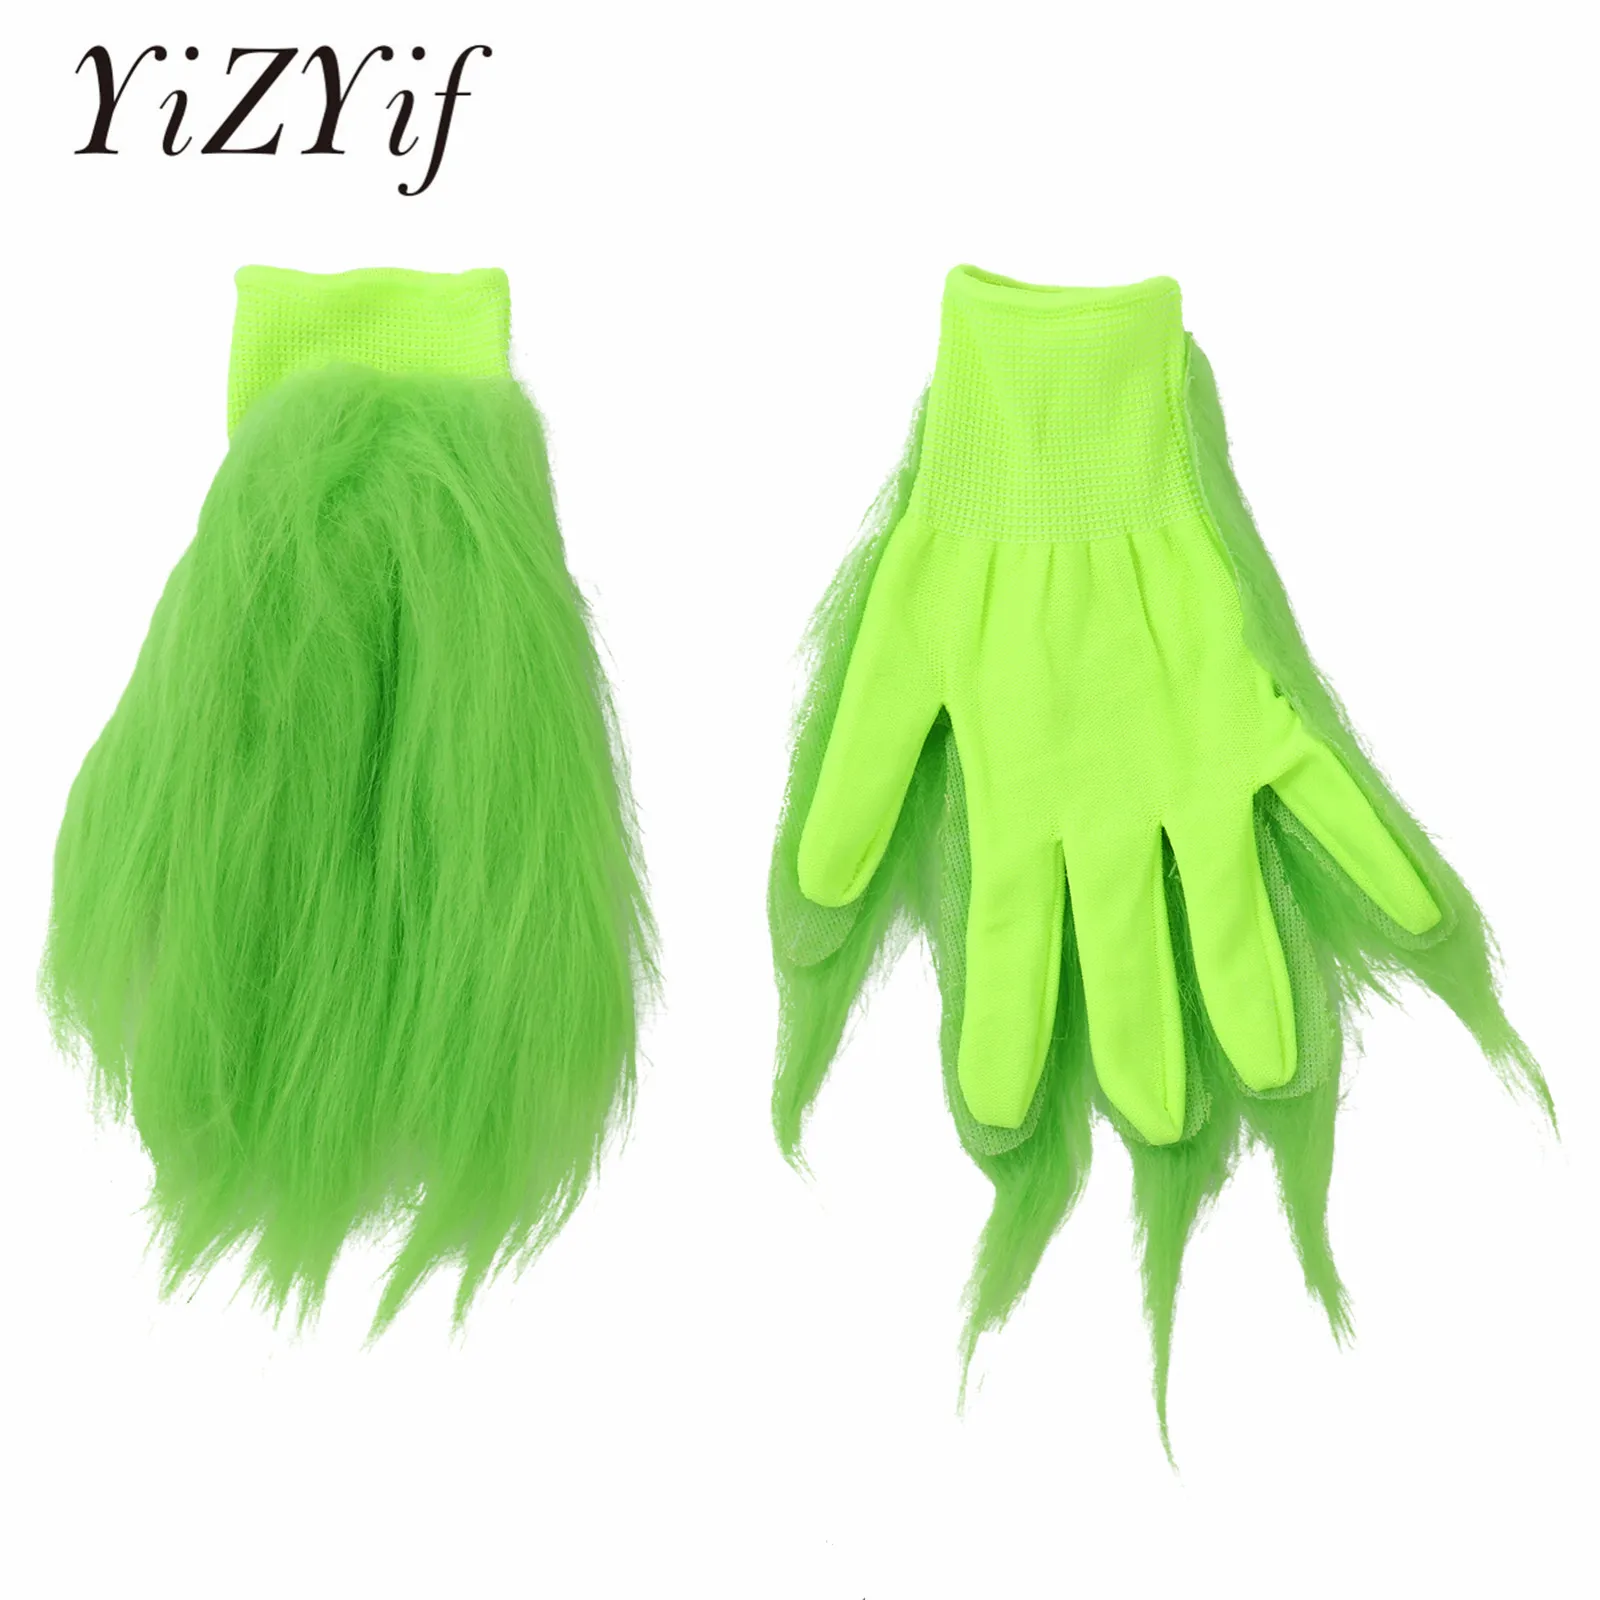 1 Pair Unisex Grinches Gloves Costume Gloves Funny Carnival Plush Green Gloves For Purim Deluxe Party Grinc Cosplay Gloves